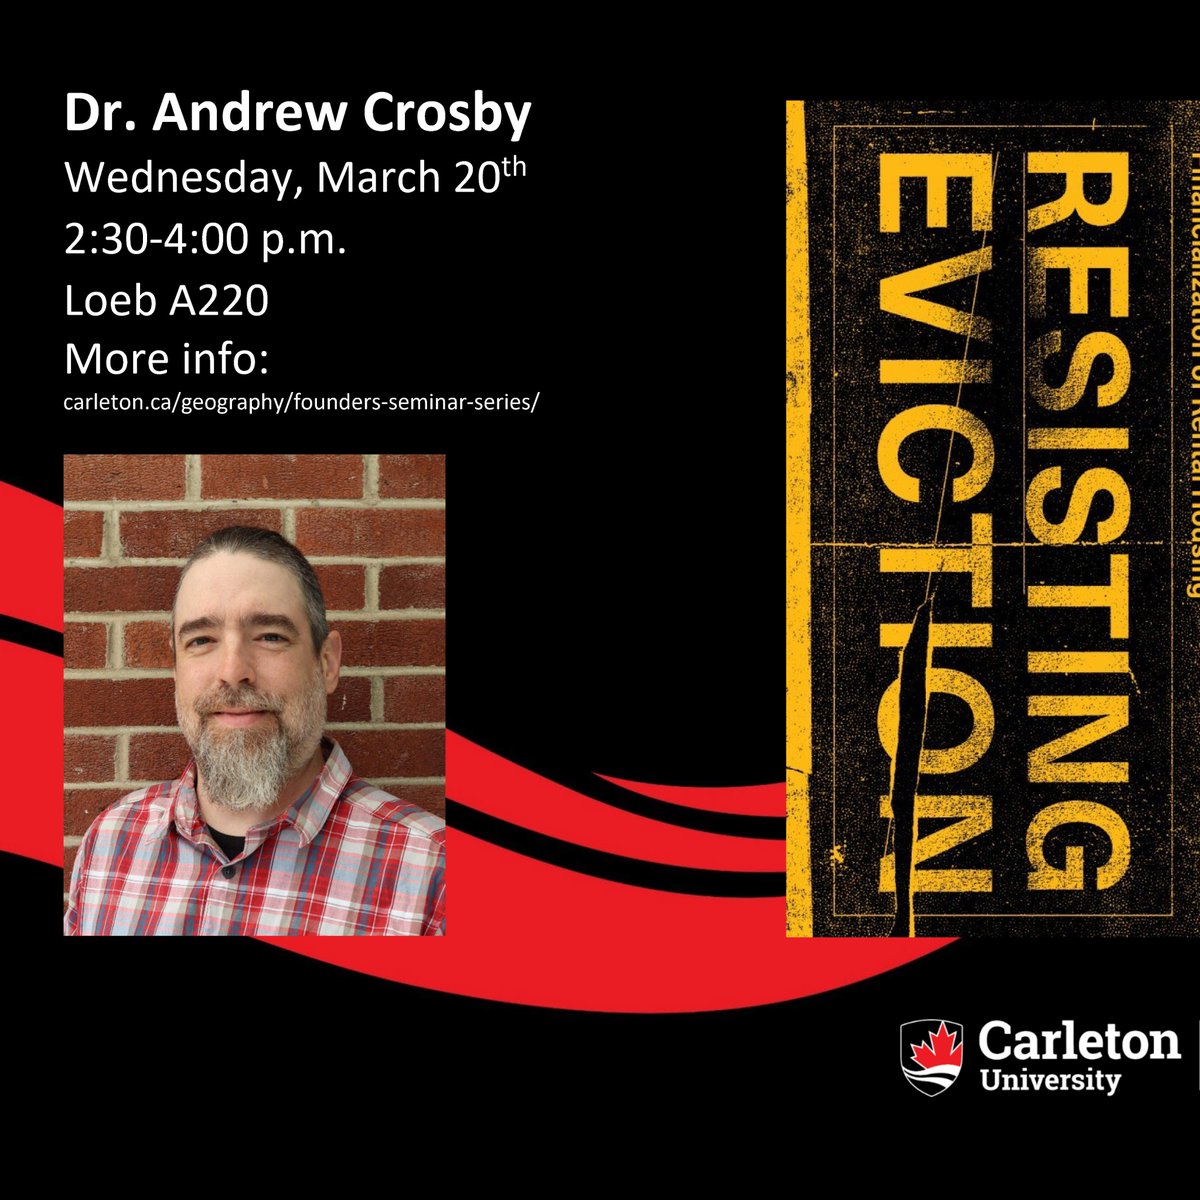 Join us today for a seminar on, 'Resisting Eviction: Domicide and the Financialization of Rental Housing' presented by postdoctoral researcher Dr. Andrew Crosby. carleton.ca/geography/wp-c…